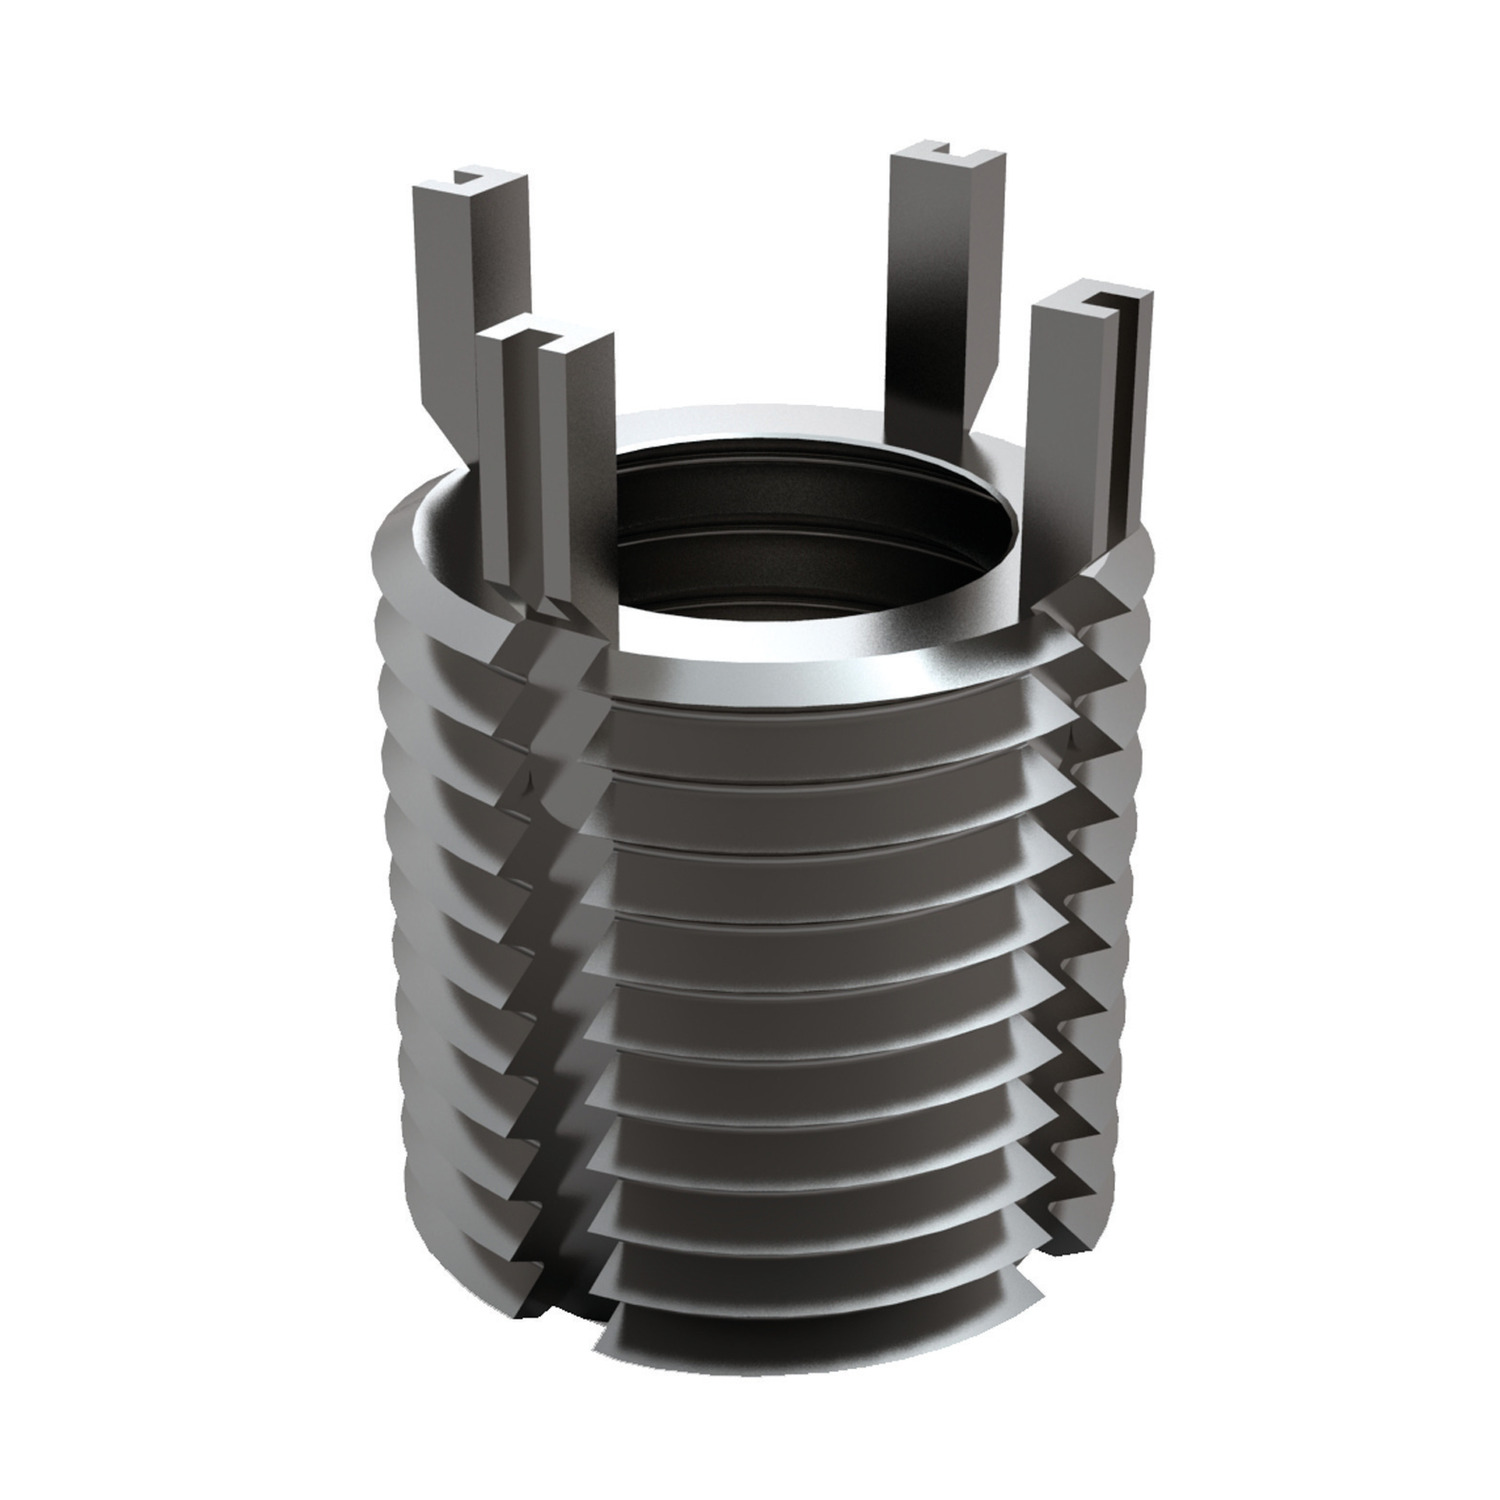 Product 22022, Threaded Insert - Inch heavy duty - stainless steel / 